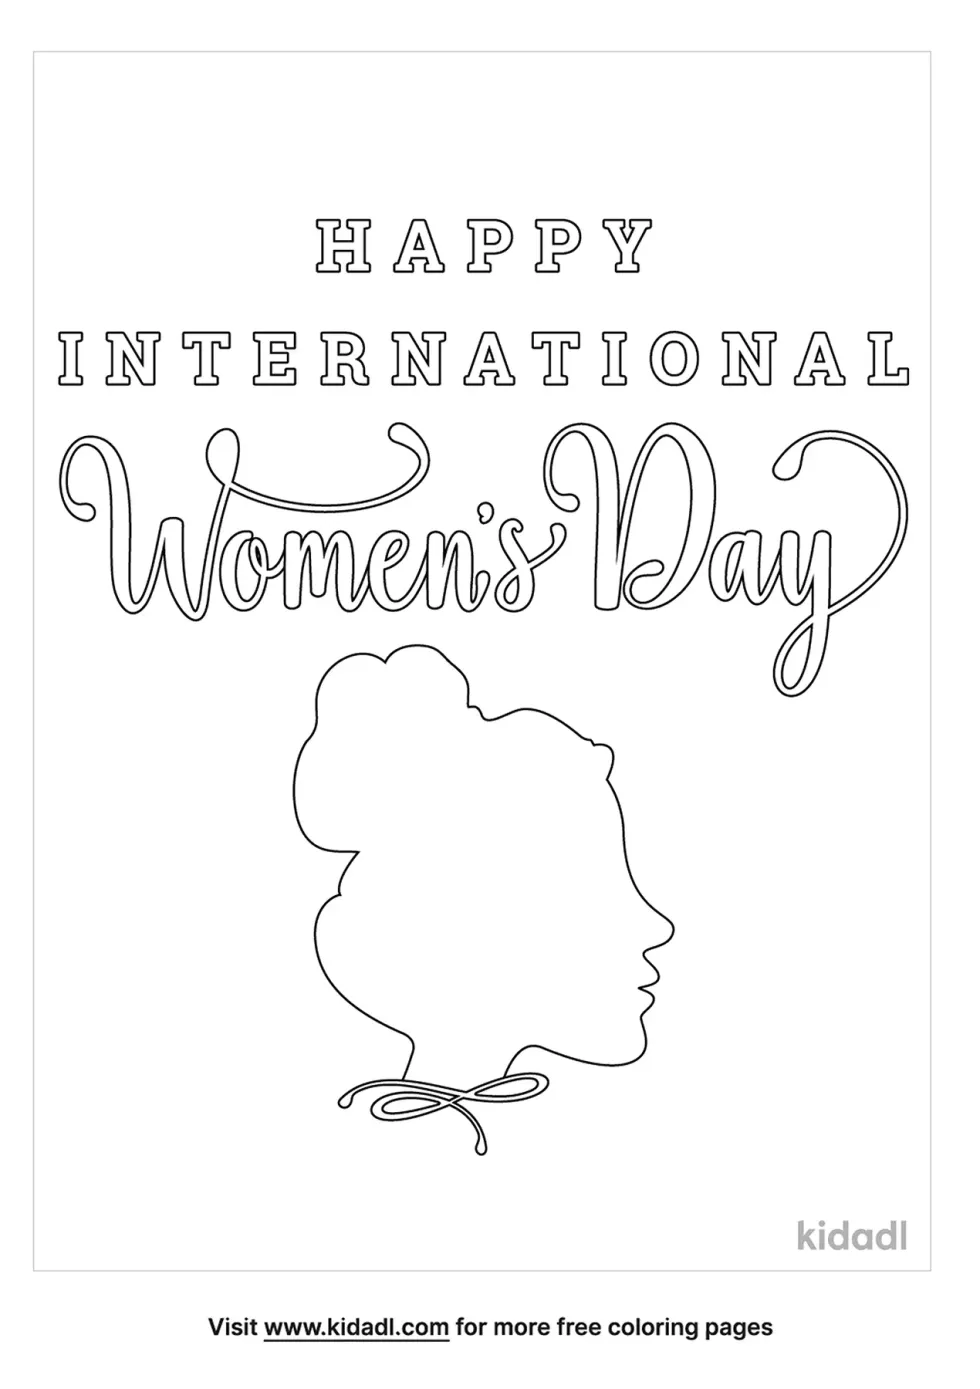 International Women's Day Coloring Page